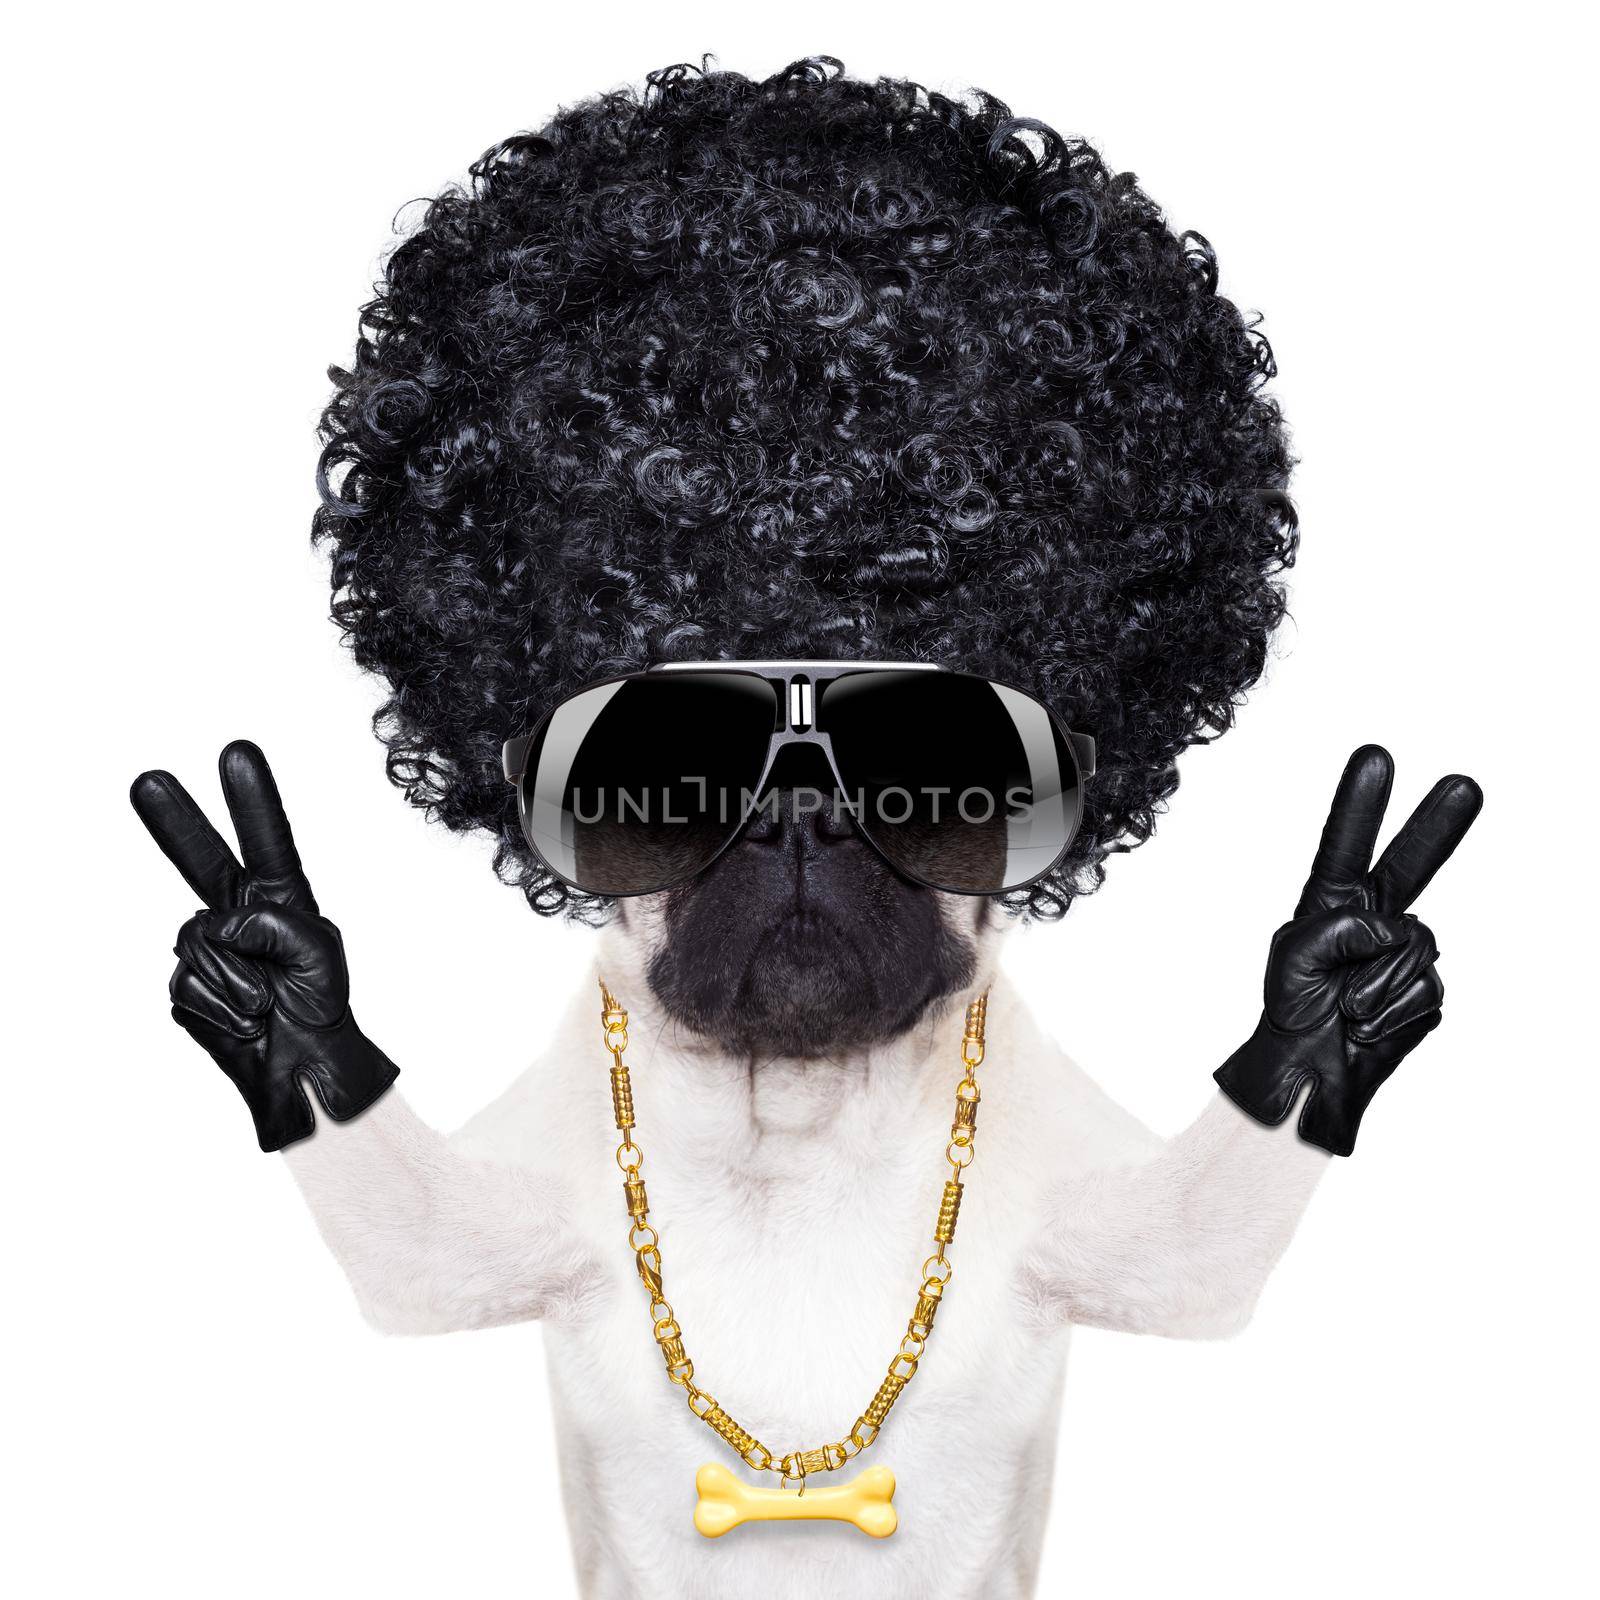 cool gangster pug dog with peace or victory fingers looking very cool with big afro look wig as hair